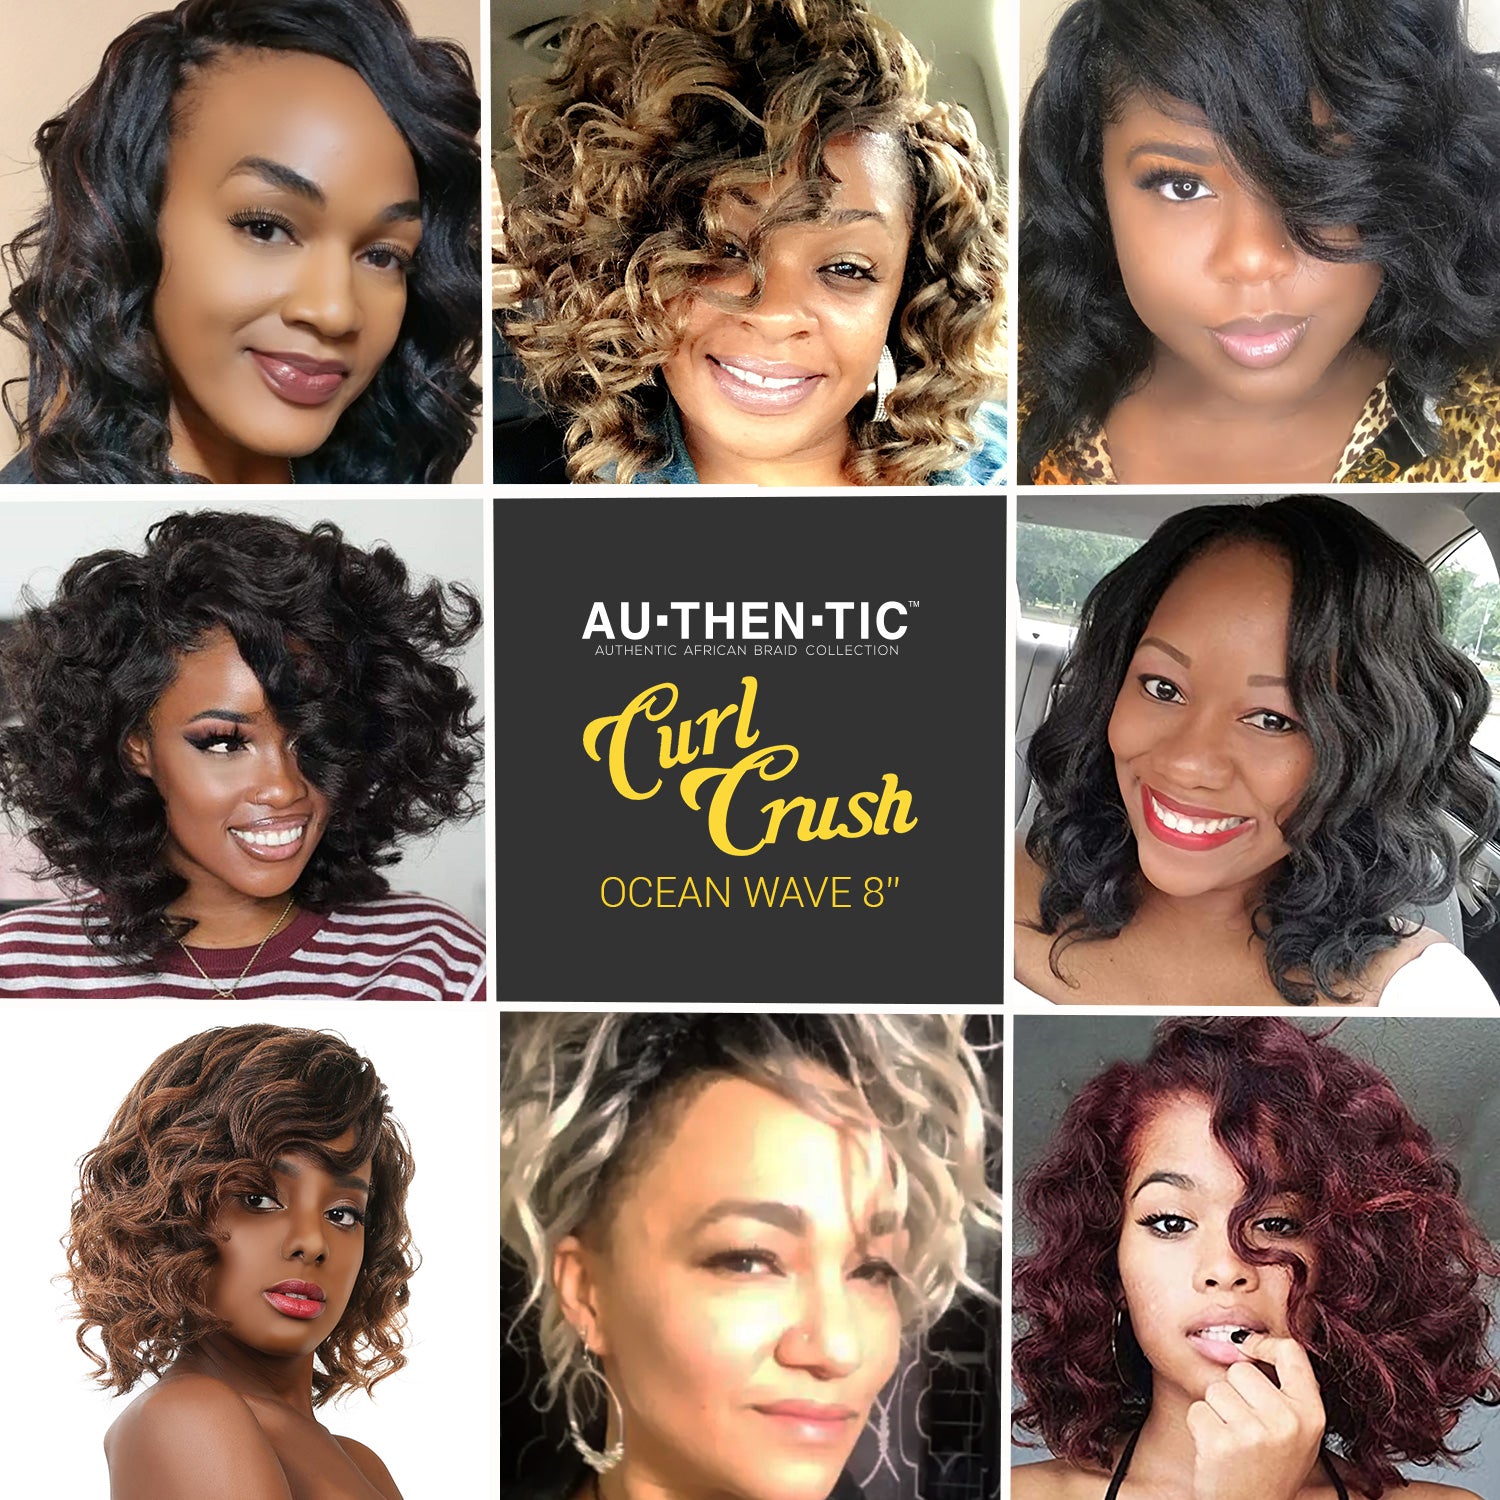 Authentic Curl Crush Synthetic Hair Crochet Braids 8X Value Pack Ocean Wave 8"